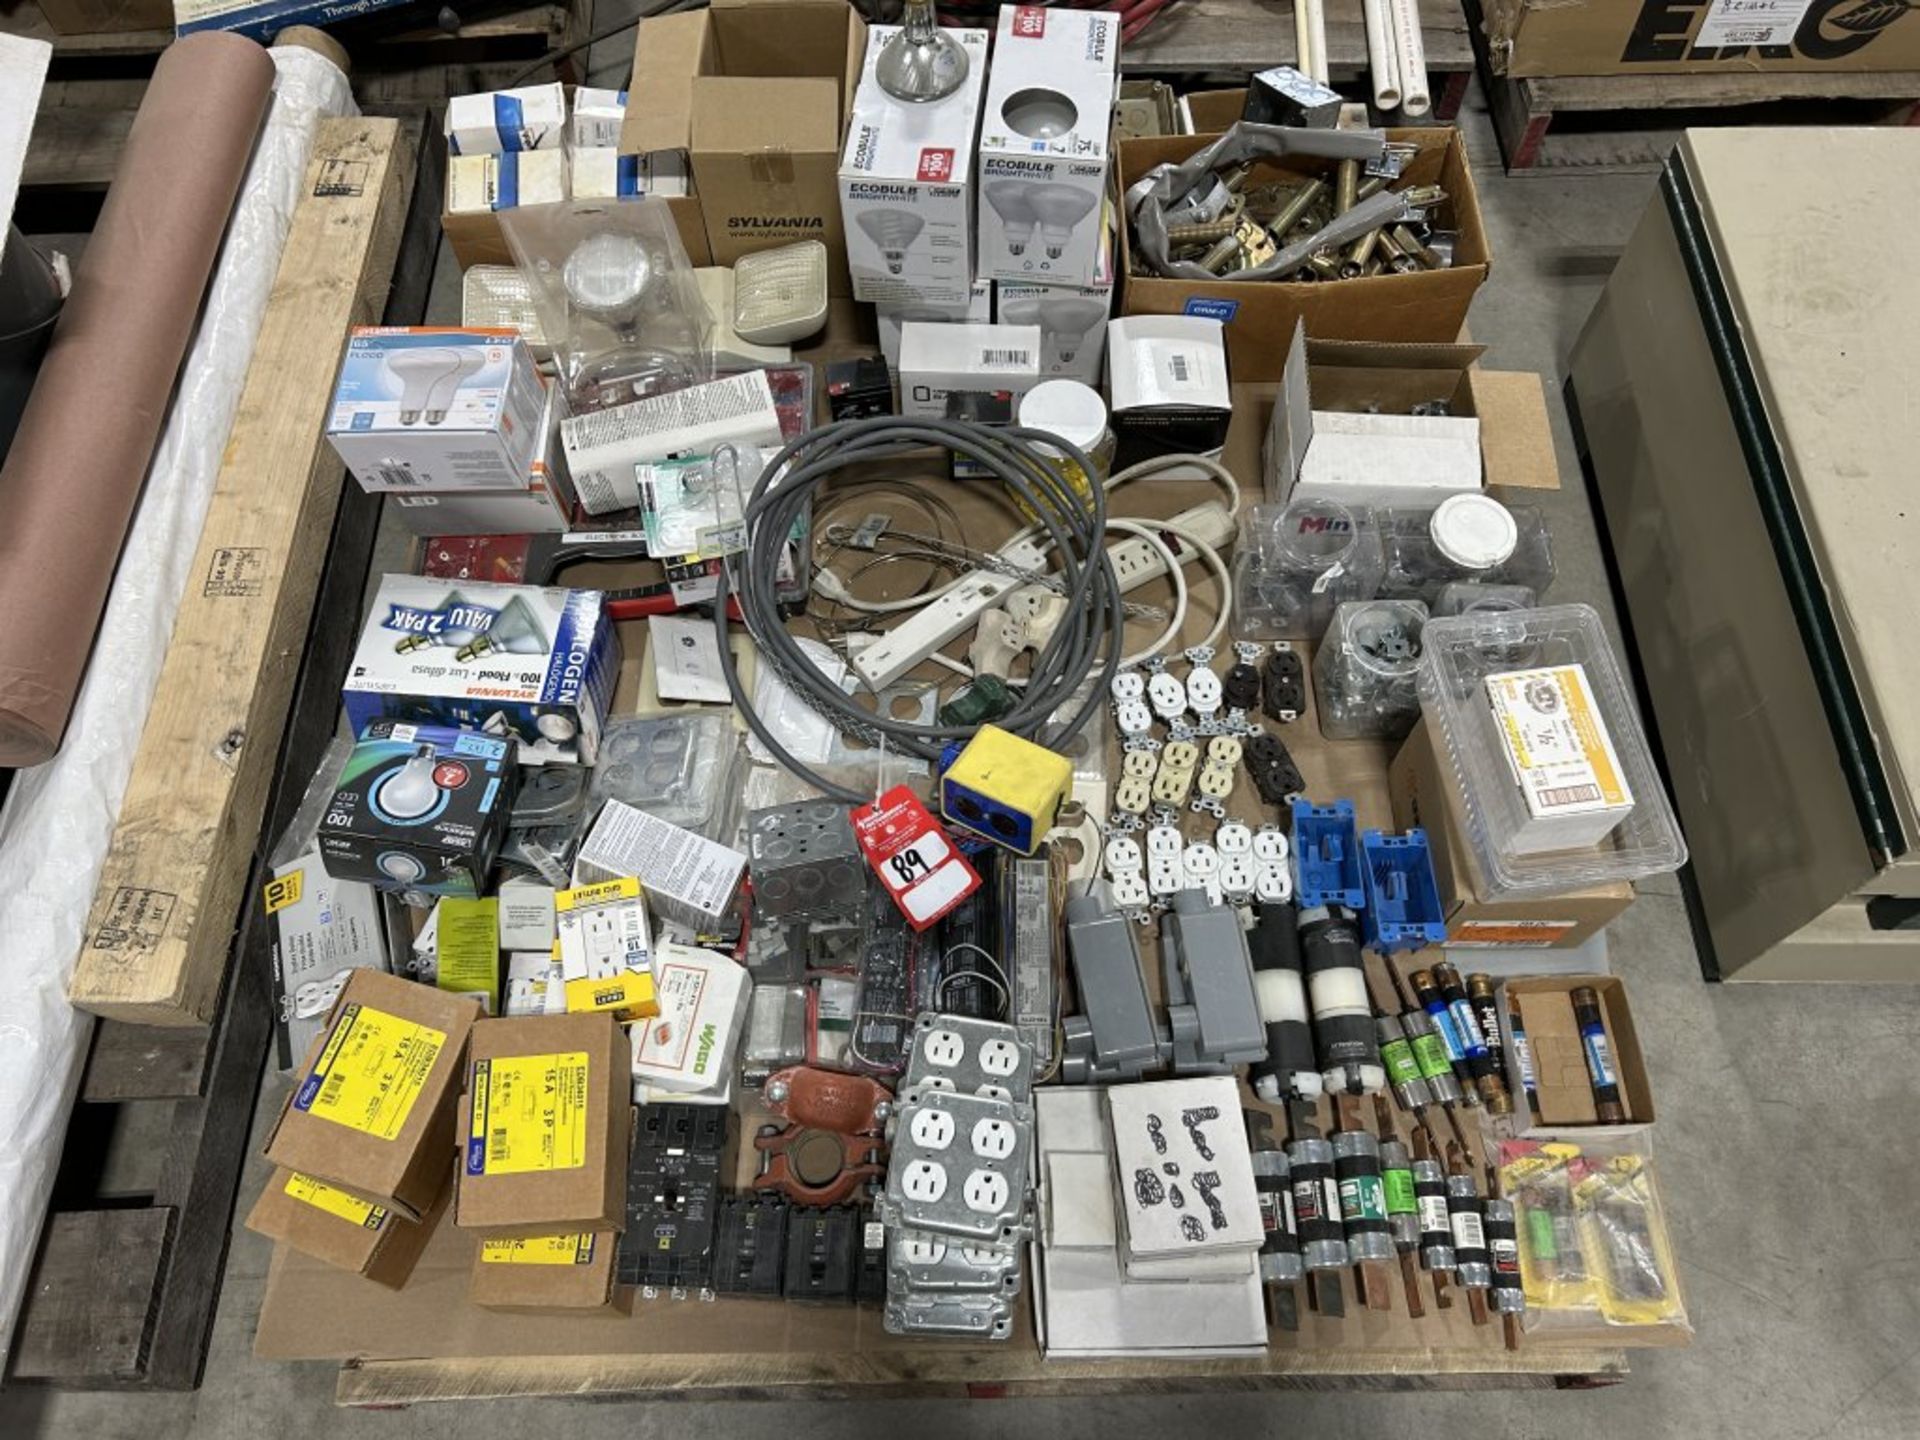 LARGE PALLET FULL OF ASSORTED FUSES, SWITCHES, OUTLETS, LIGHT BULBS, SPRINGS, ETC.